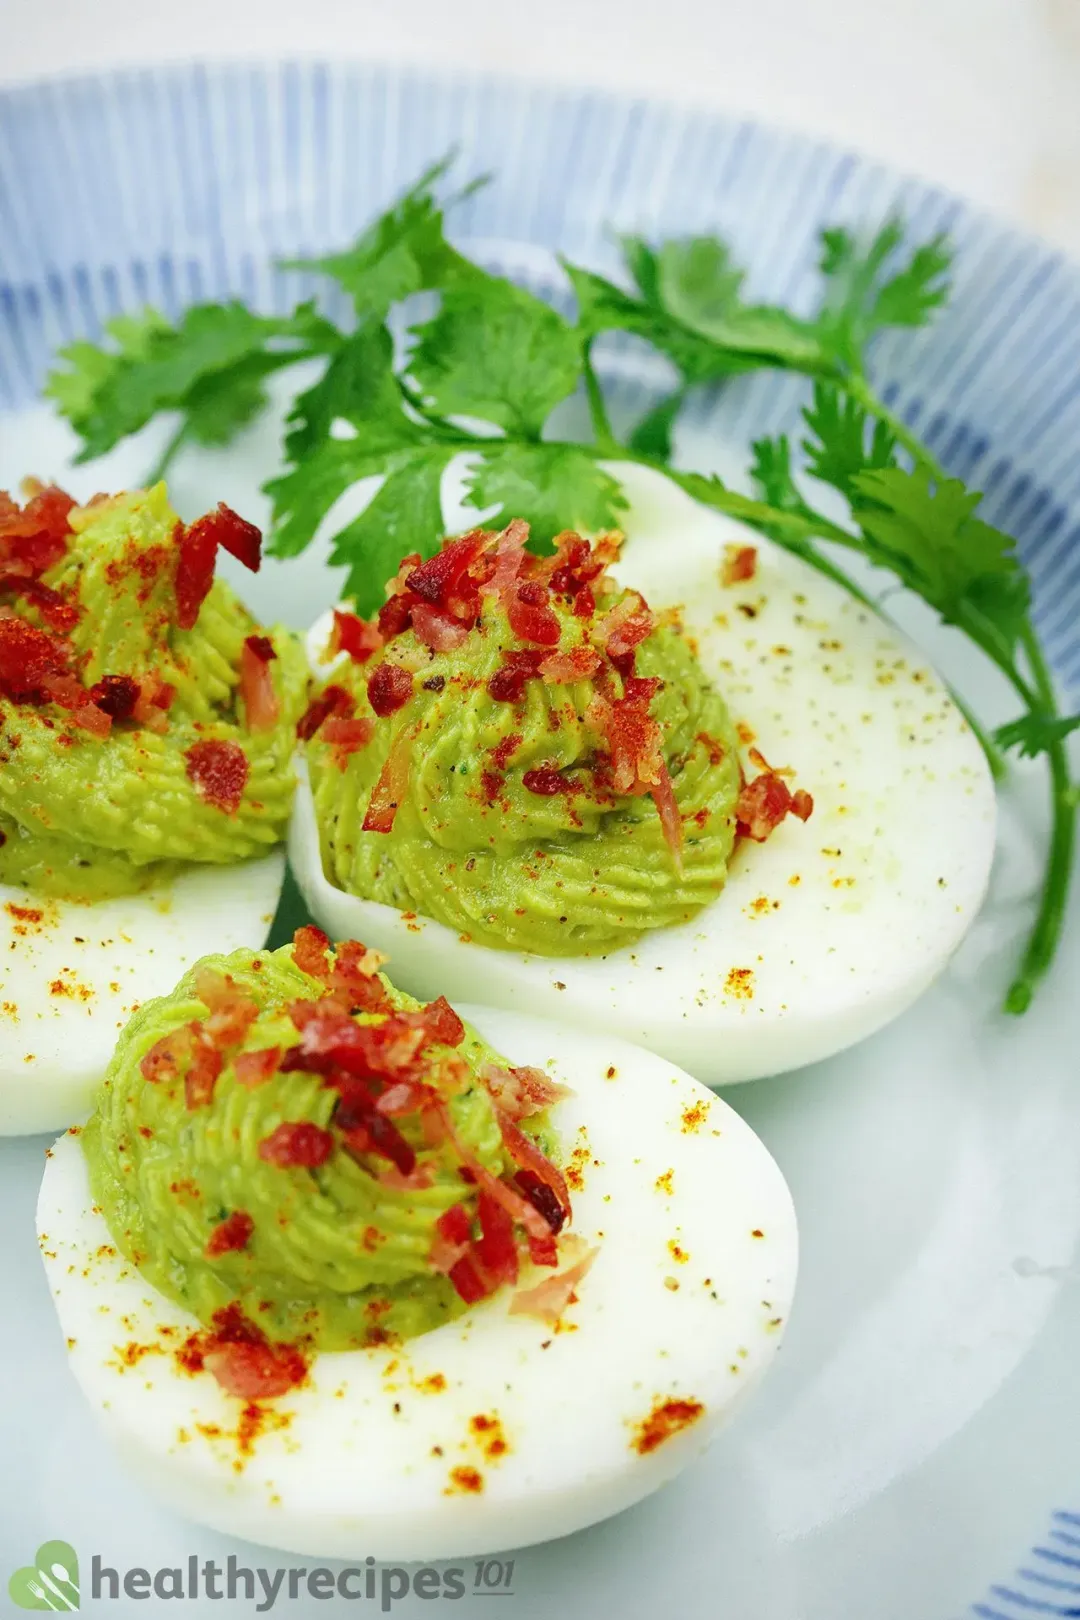 How to Prepare Ingredients for avocado deviled eggs